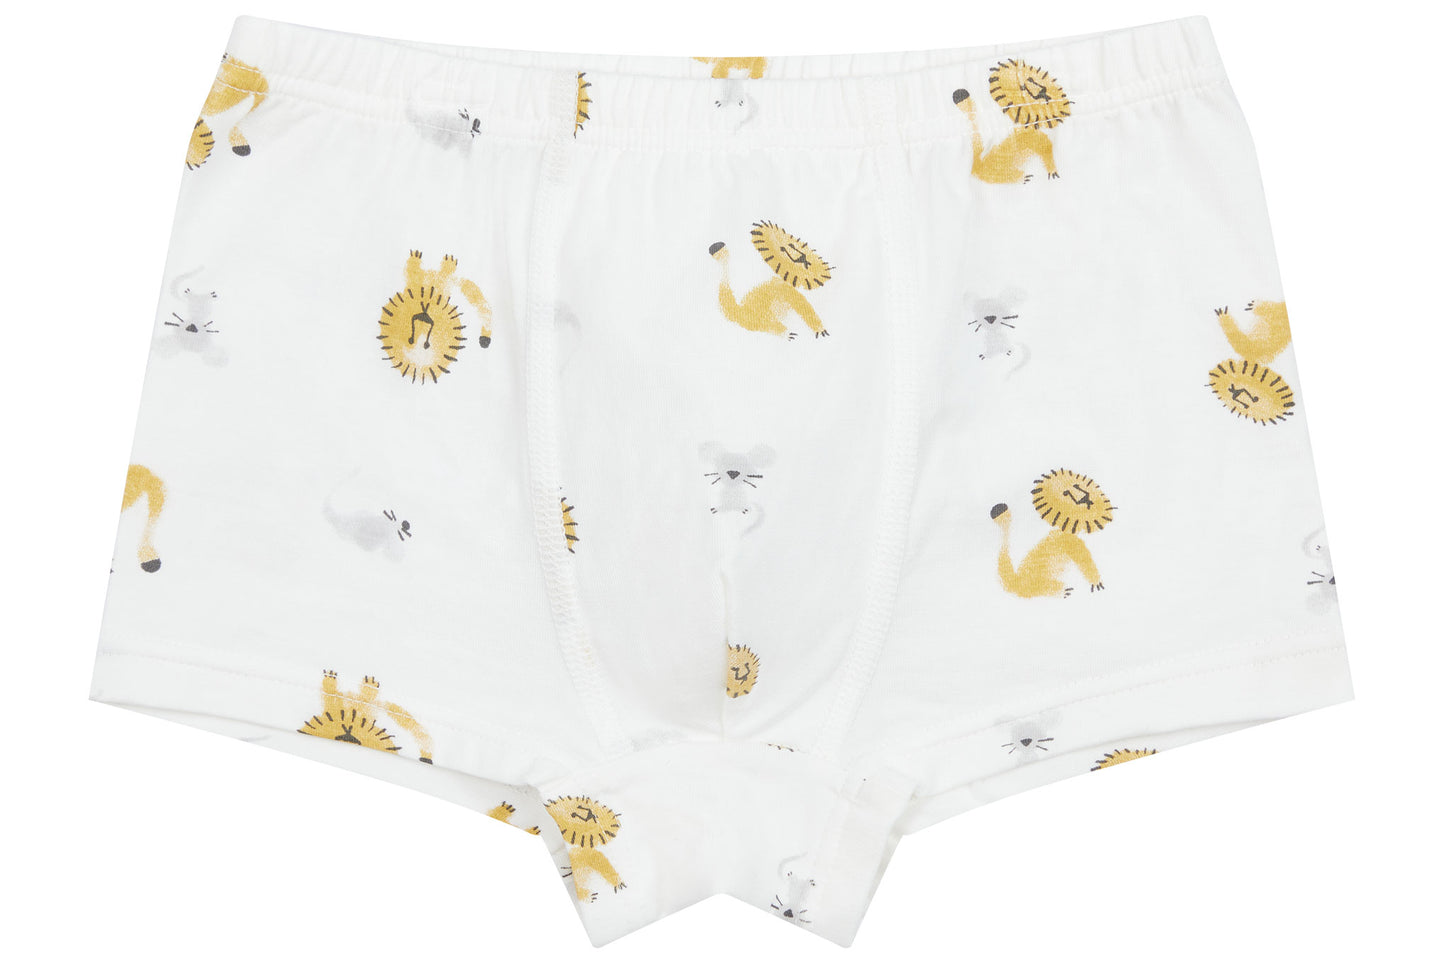 Boys Boxer Briefs Underwear (Bamboo, 2 Pack) - The Lion & The Goose ...